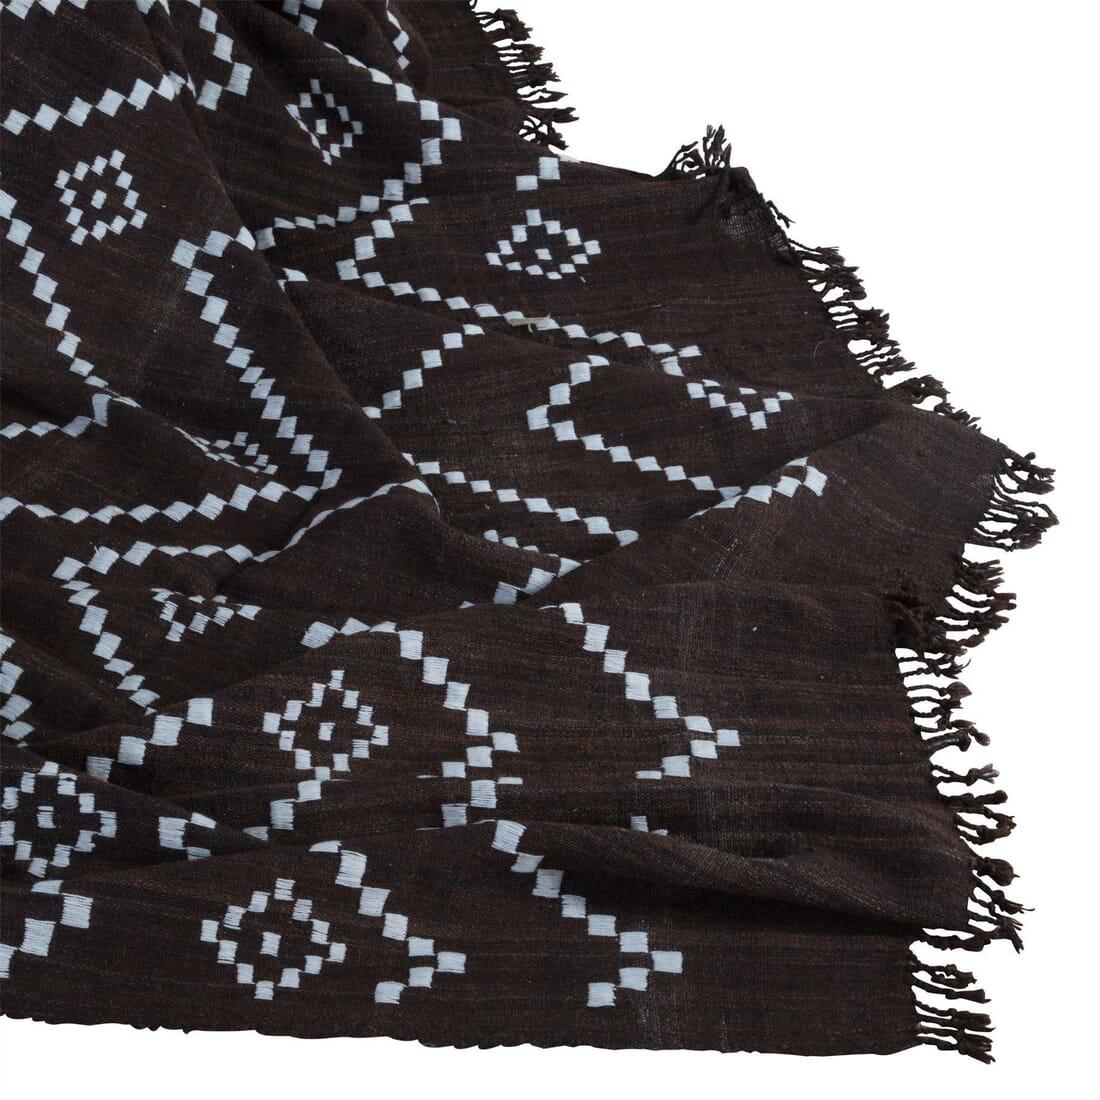 A large contemporary Indian wool throw/bedspread - hand spun, hand woven and hand dyed.